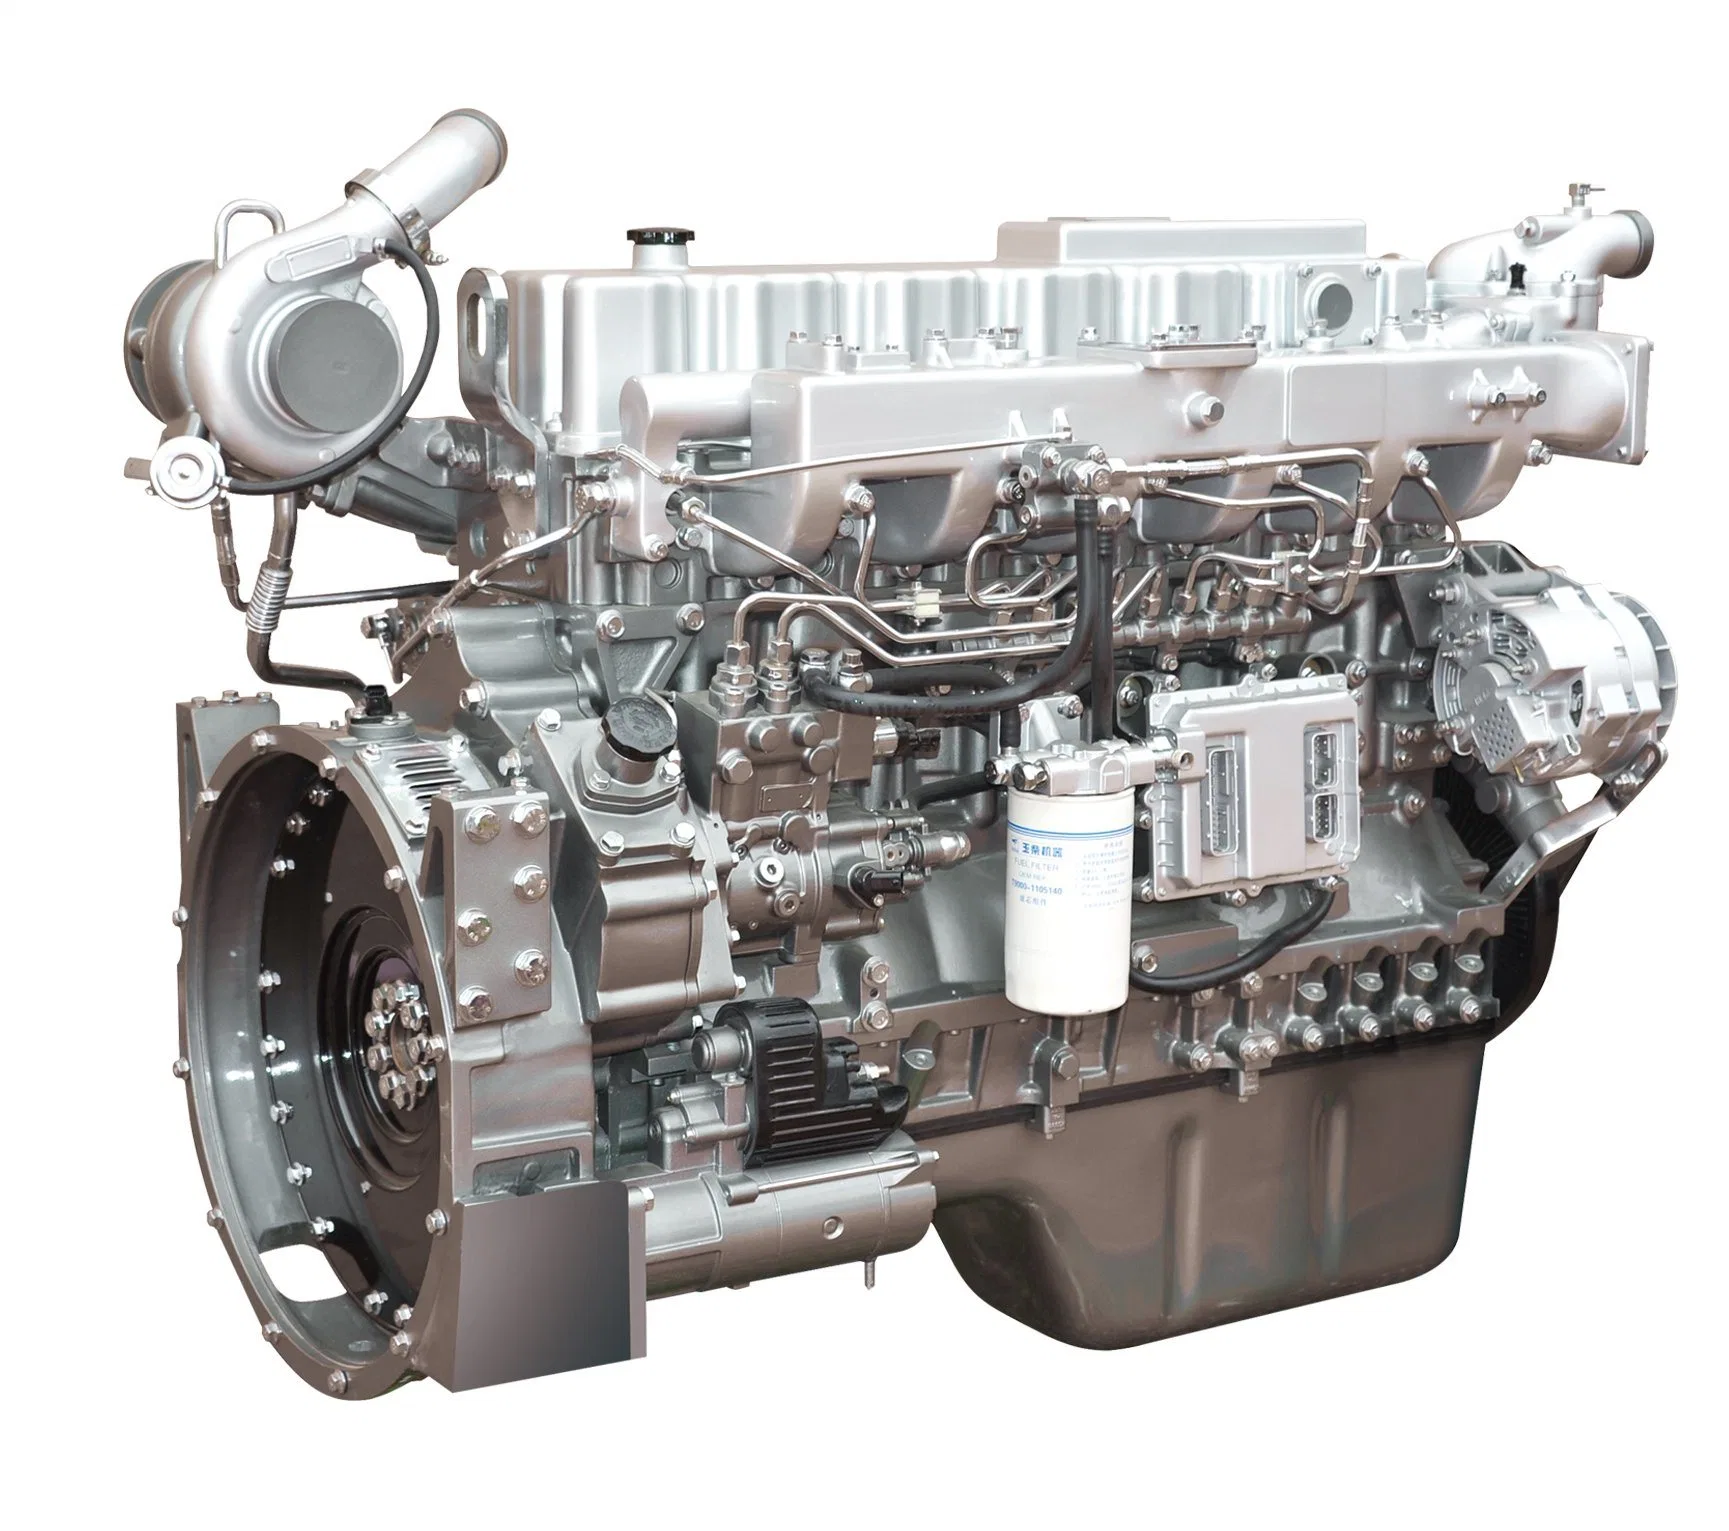 Yuchai YC6MK (YC6MK385-50) Euro 5 Emission Medium and Heavy Duty Diesel Engine with High Power, High Reliability, Low Fuel Consumption and Sufficient Power